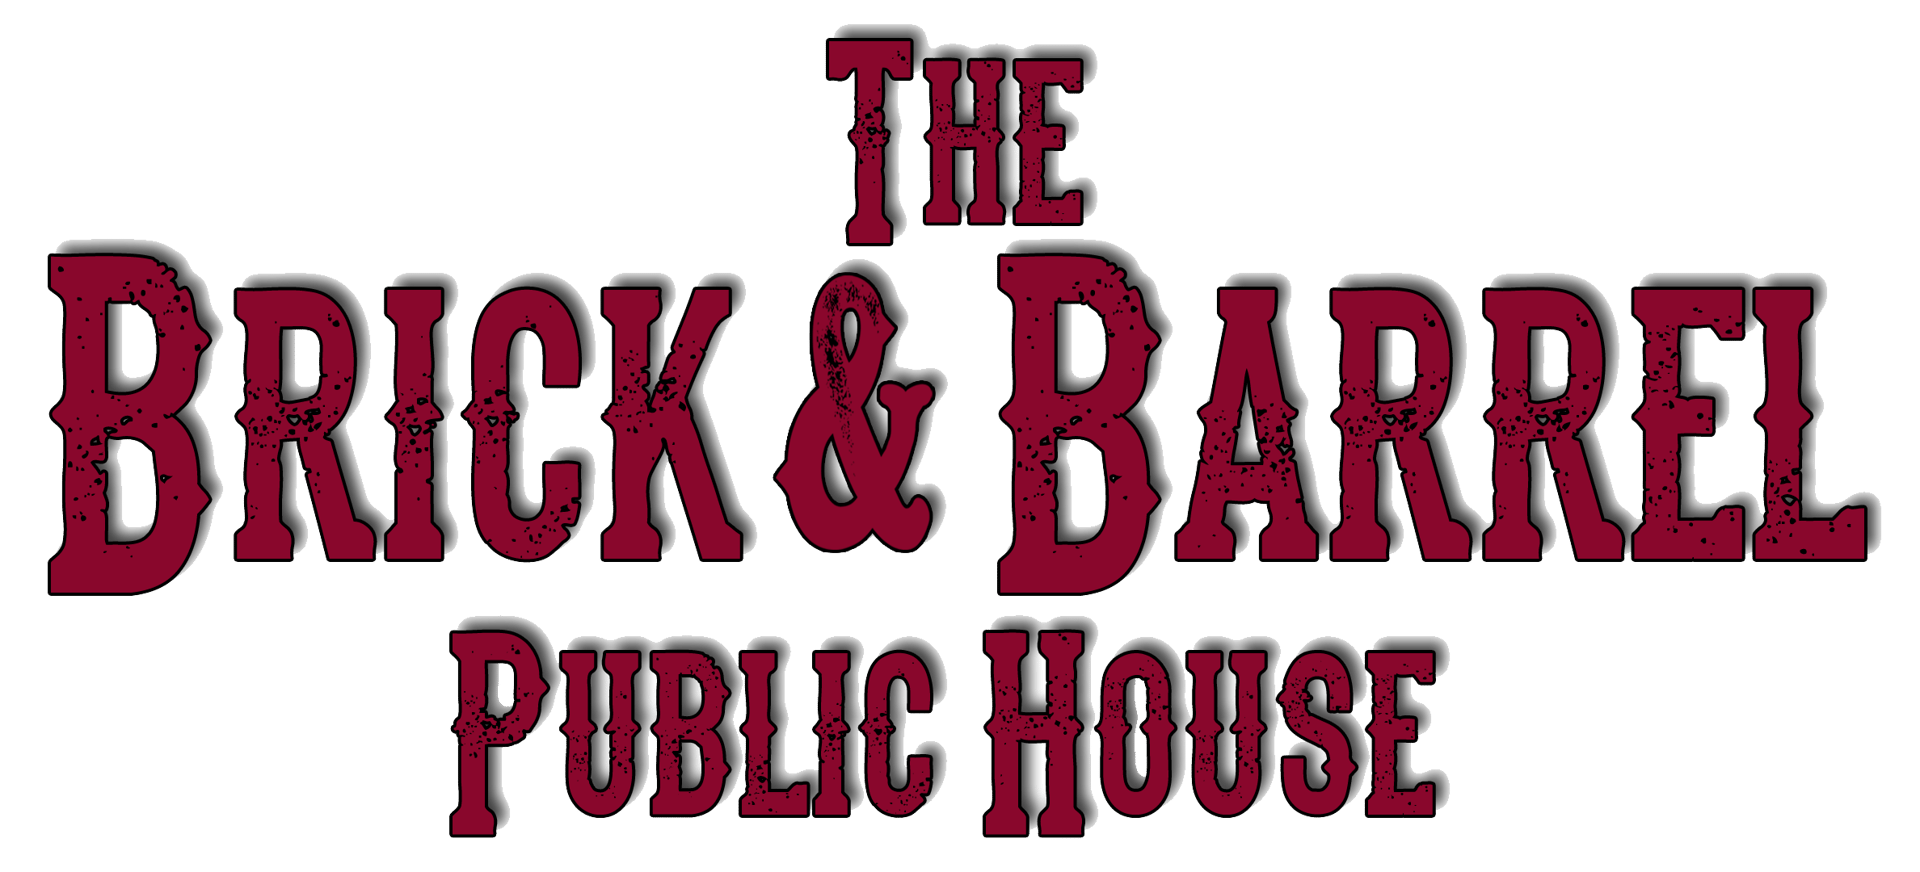 The Brick and Barrel Public House